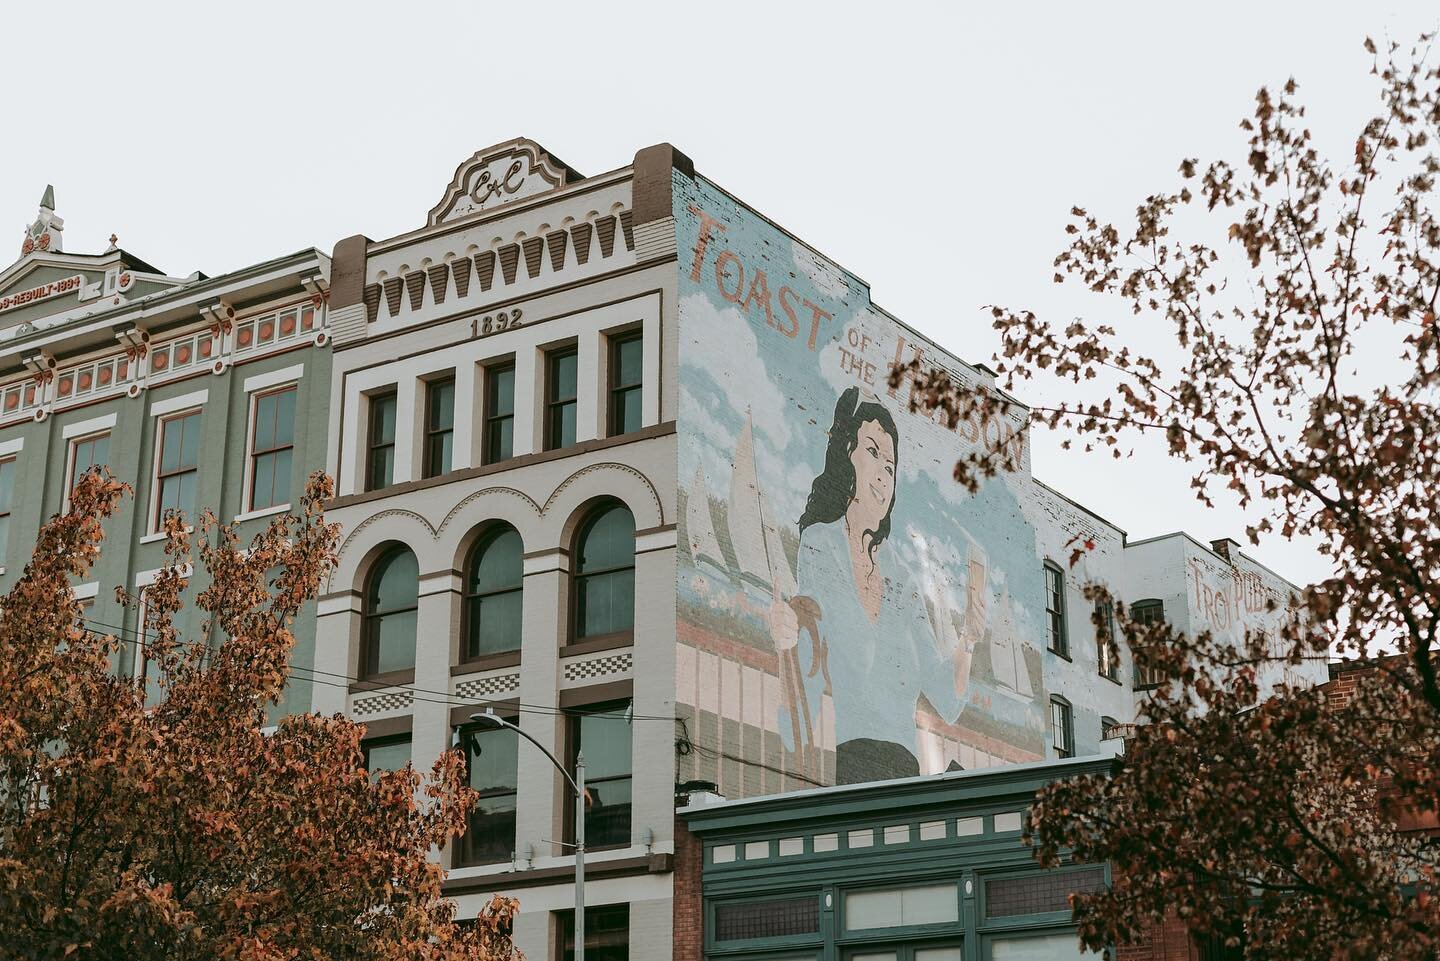 We are so lucky to have these beautiful 19th century buildings as a part of our story. 

- Fun fact: the woman painted on the mural is actually Kelly Brown (co-owner of Brown&rsquo;s). She modeled years ago for muralist Kevin Clark who has his work i